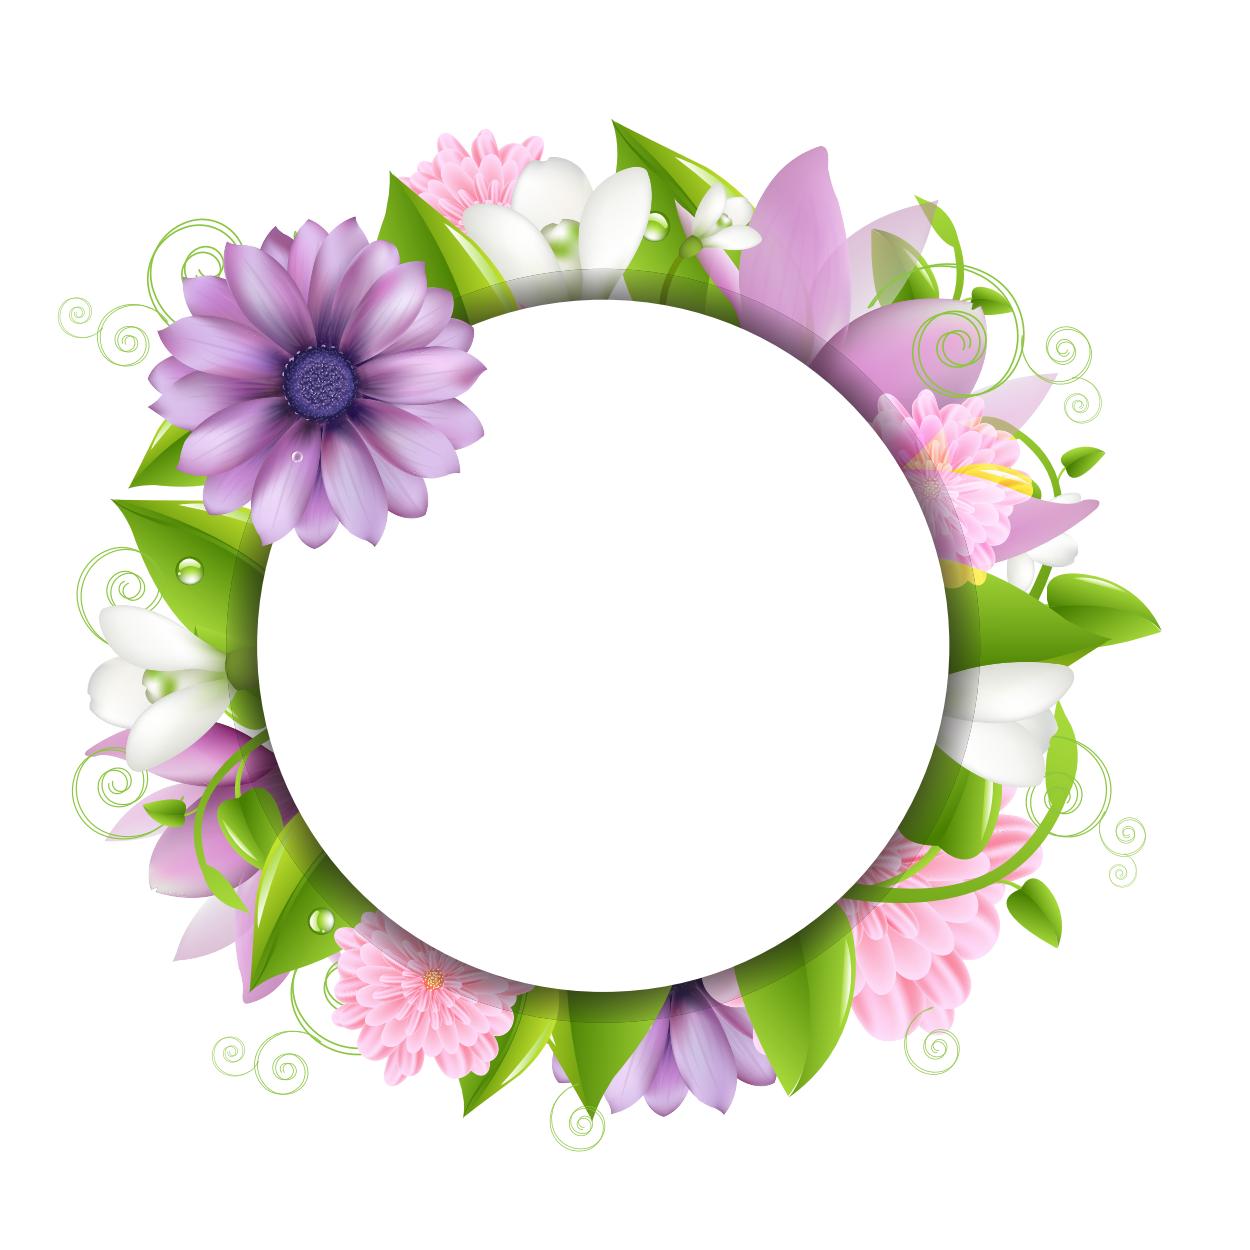 Flower Background, Frame Vector EPS Free Download, Logo, Icons ... -  ClipArt Best - ClipArt Best